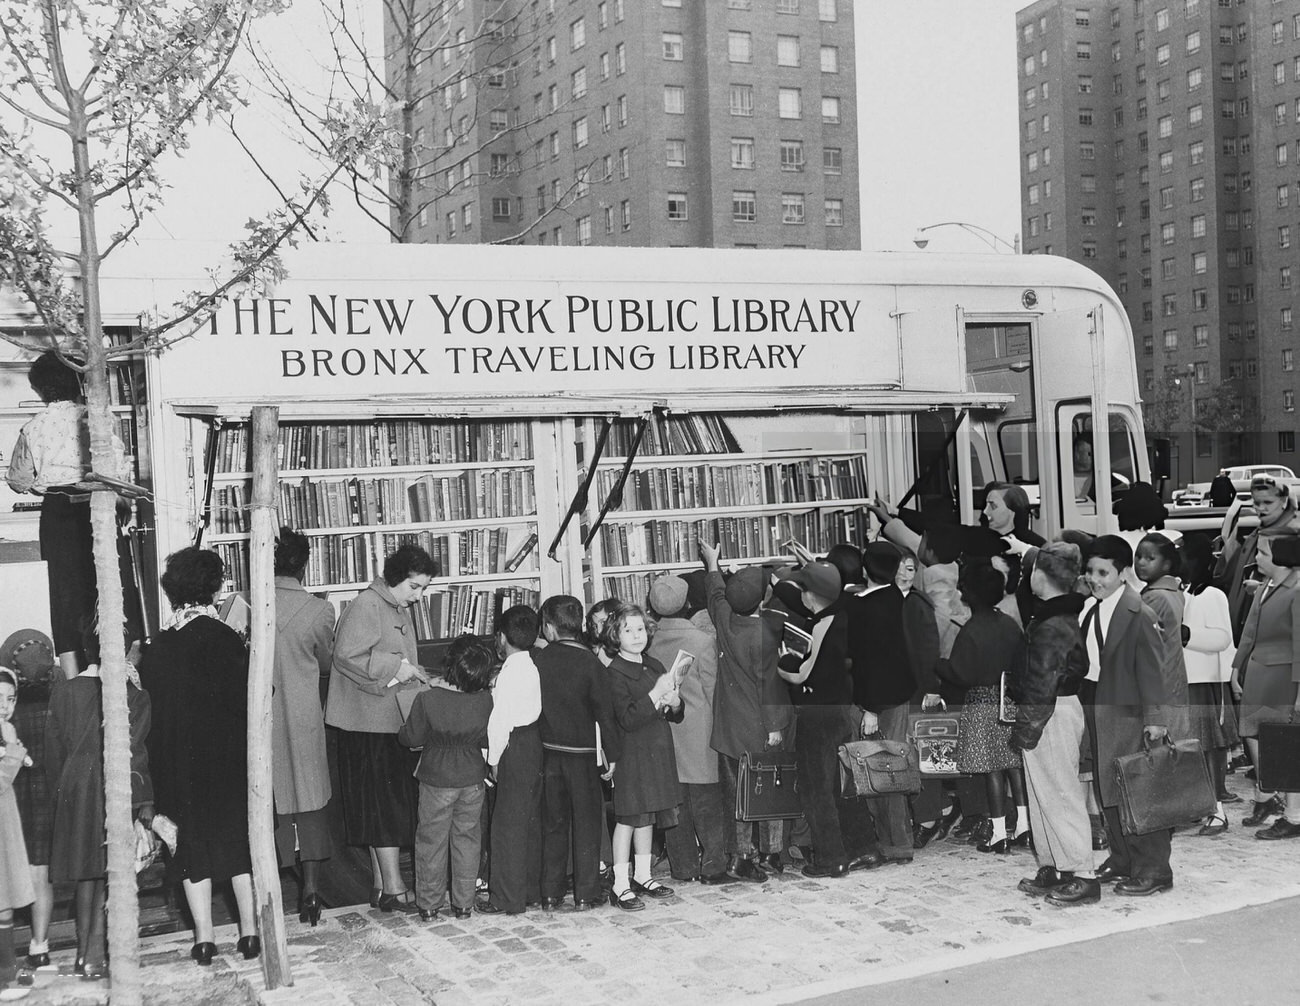 A Large Group Of Children And Adults Gather At The Bronx Traveling Library Bookmobile In New York City, 1954.